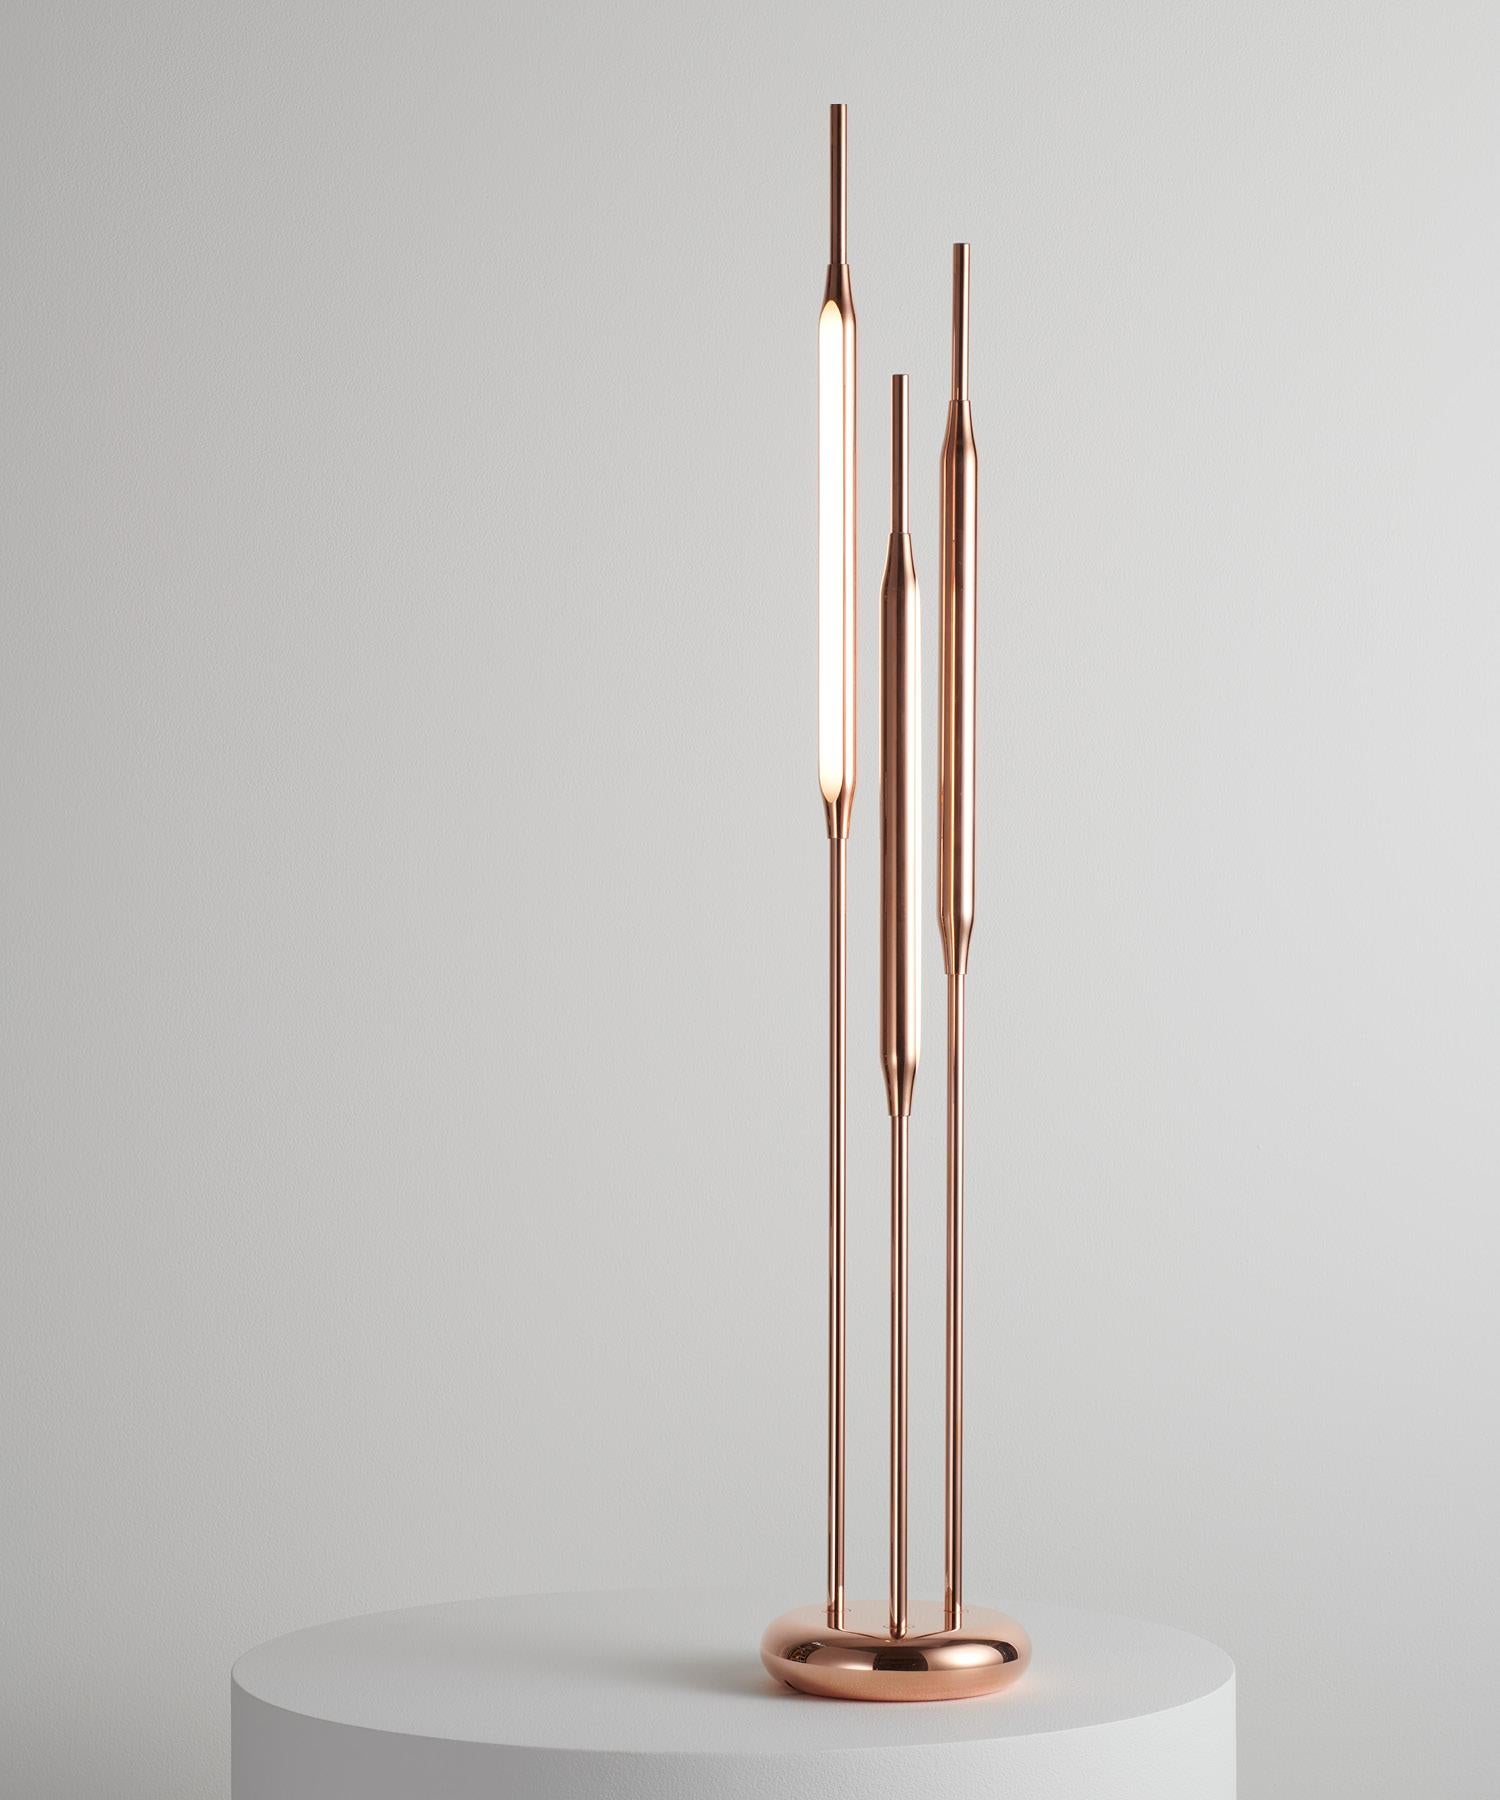 Inspired by delicate, natural forms, the Reed Table Lights are designed to provide atmospheric accents to sophisticated interiors.
Used individually or clustered together in small groups, they can be used as tools to create an alternative